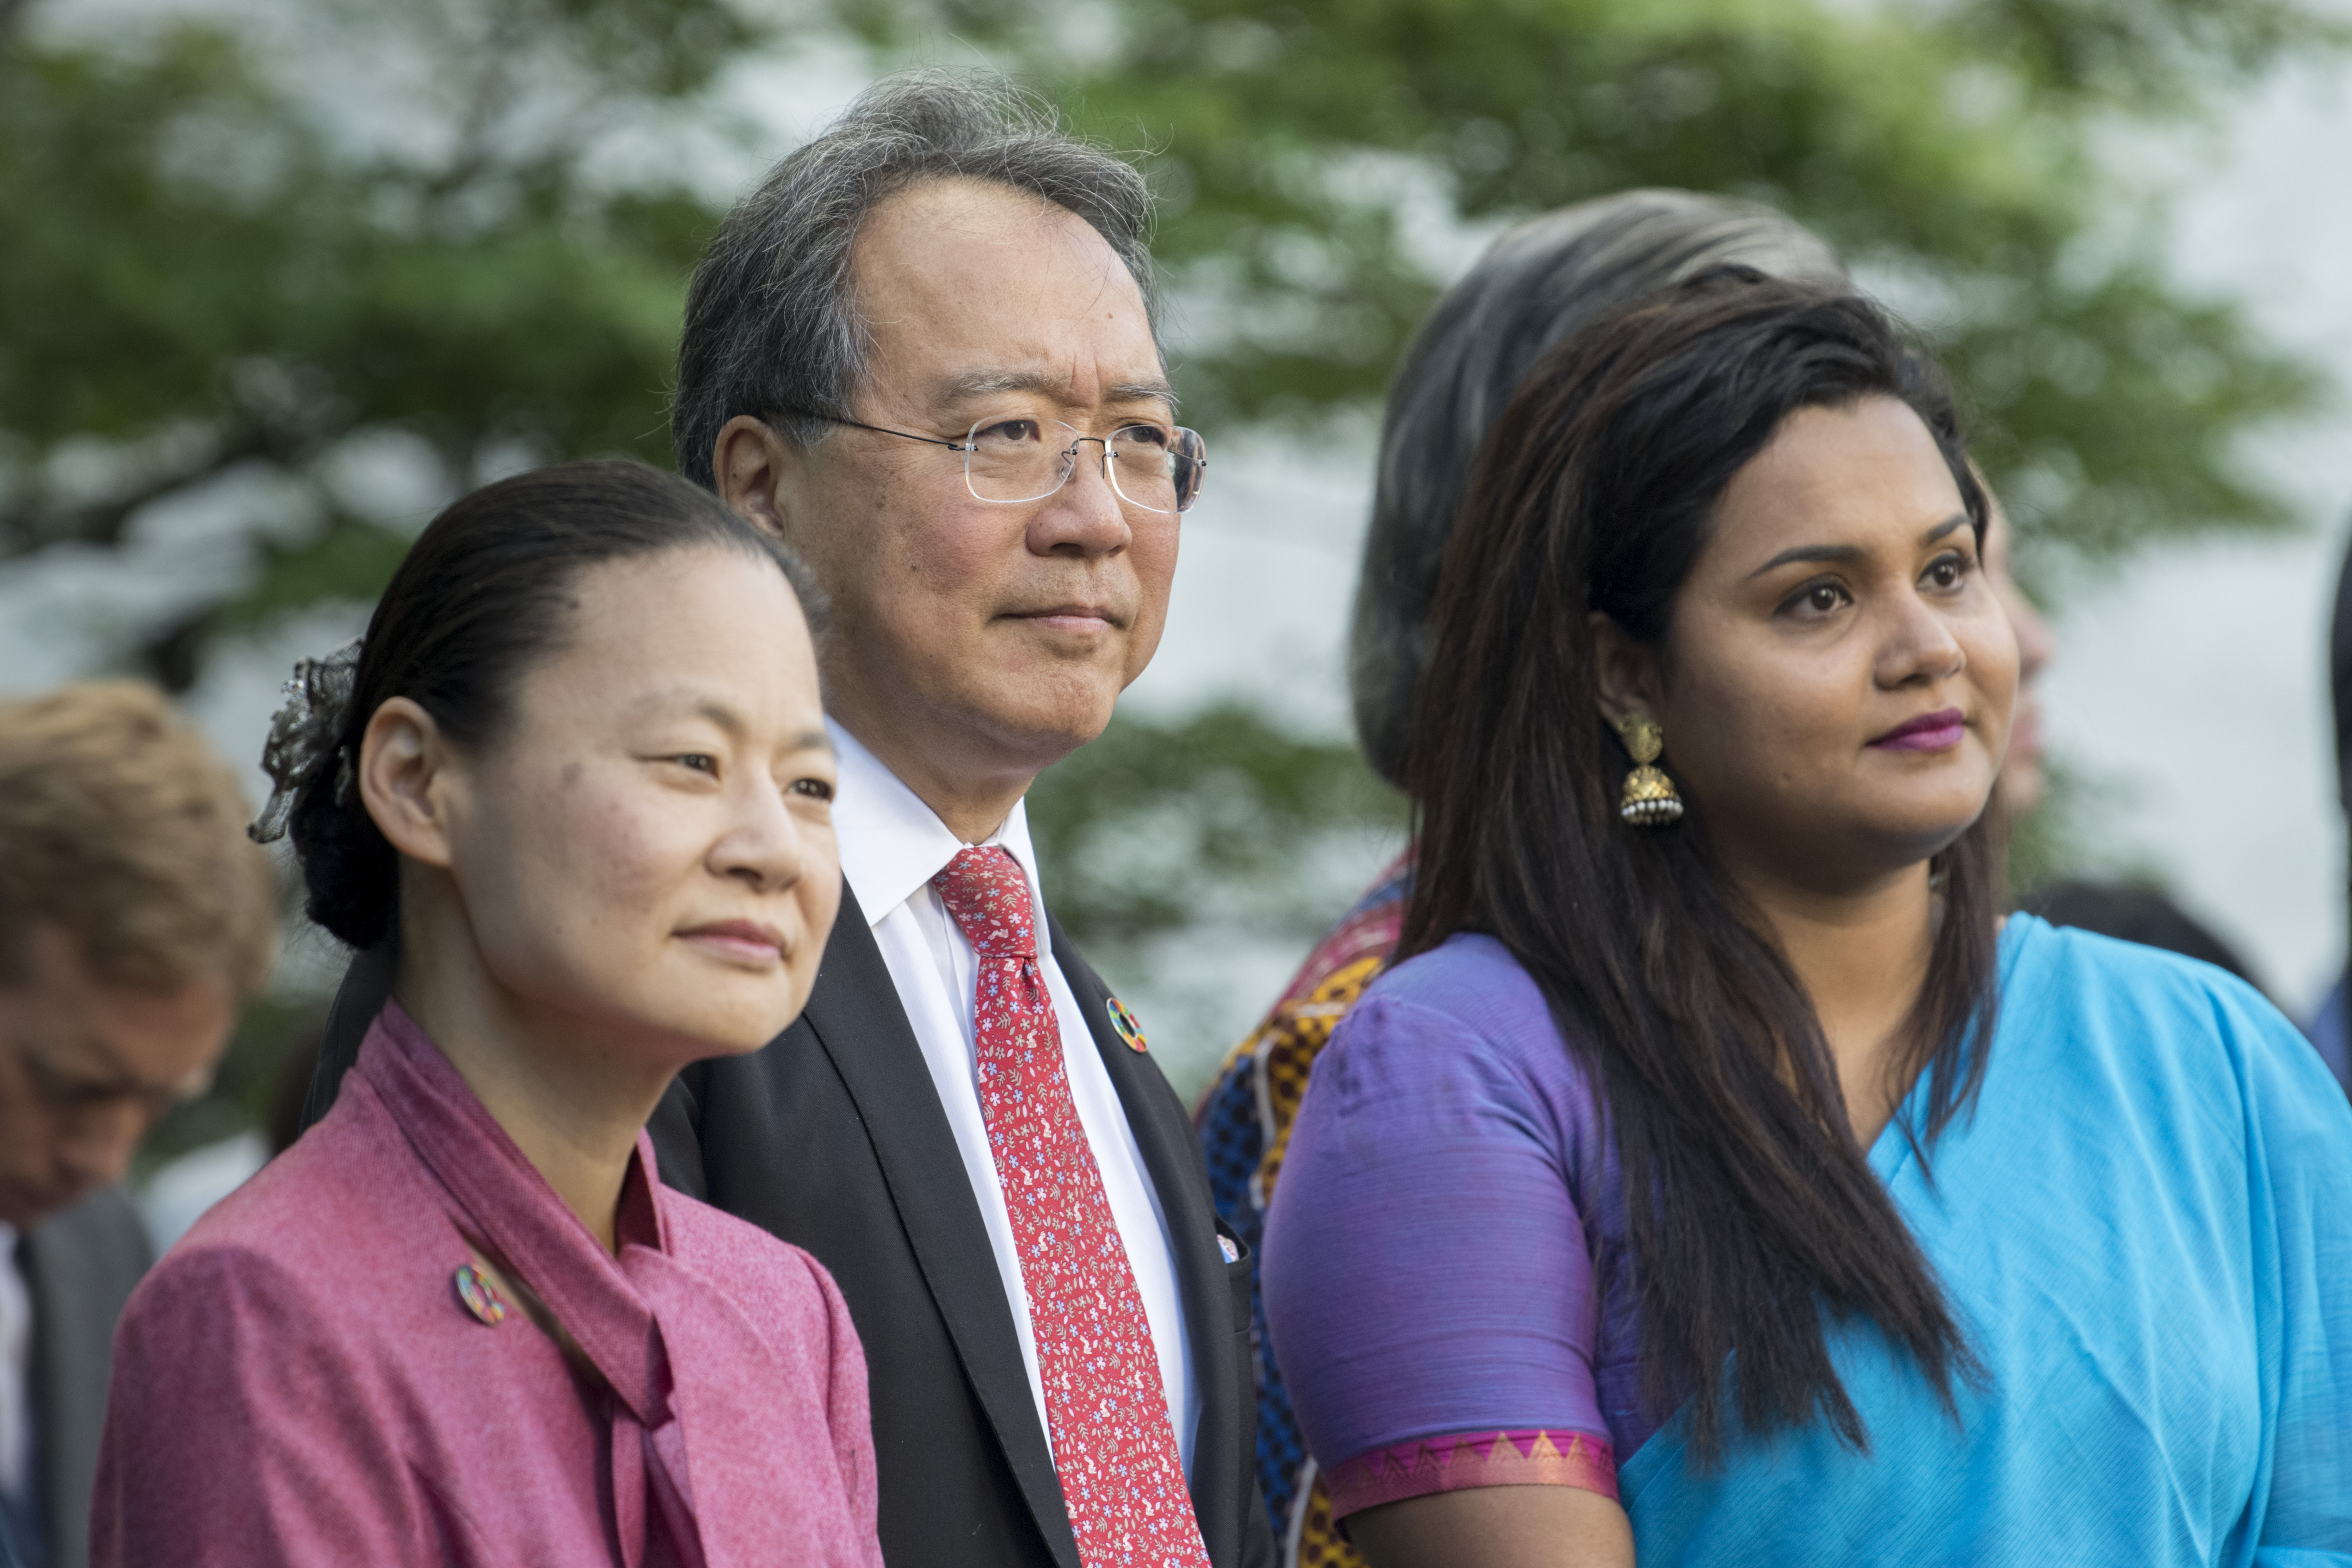 UN Messengers of Peace Midori Goto and Yo-Yo Ma, and Jayathma Wickramanayake, UN Secretary-General's Envoy on Youth, attend the ceremony in observance of the International Day of Peace (21 September) at UN headquarters. 20 Sep 2019/ UN Photo/Mark Garten